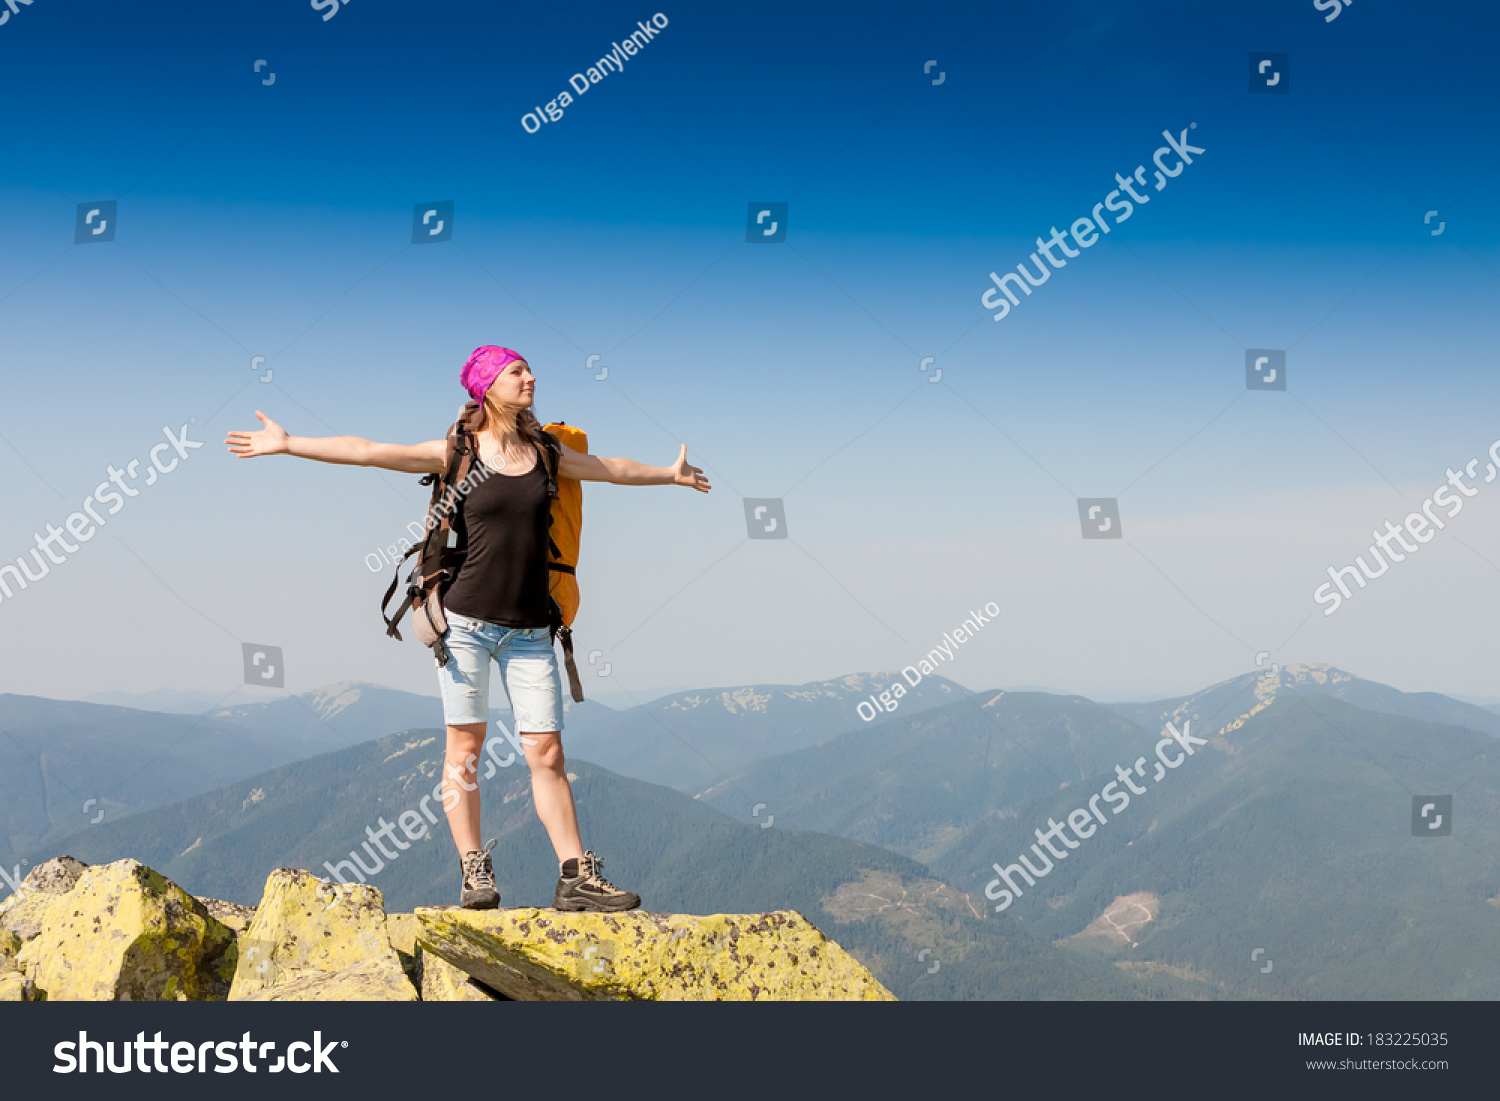 Hiker with backpack standing on top of a mountain and enjoying the view  #183225035